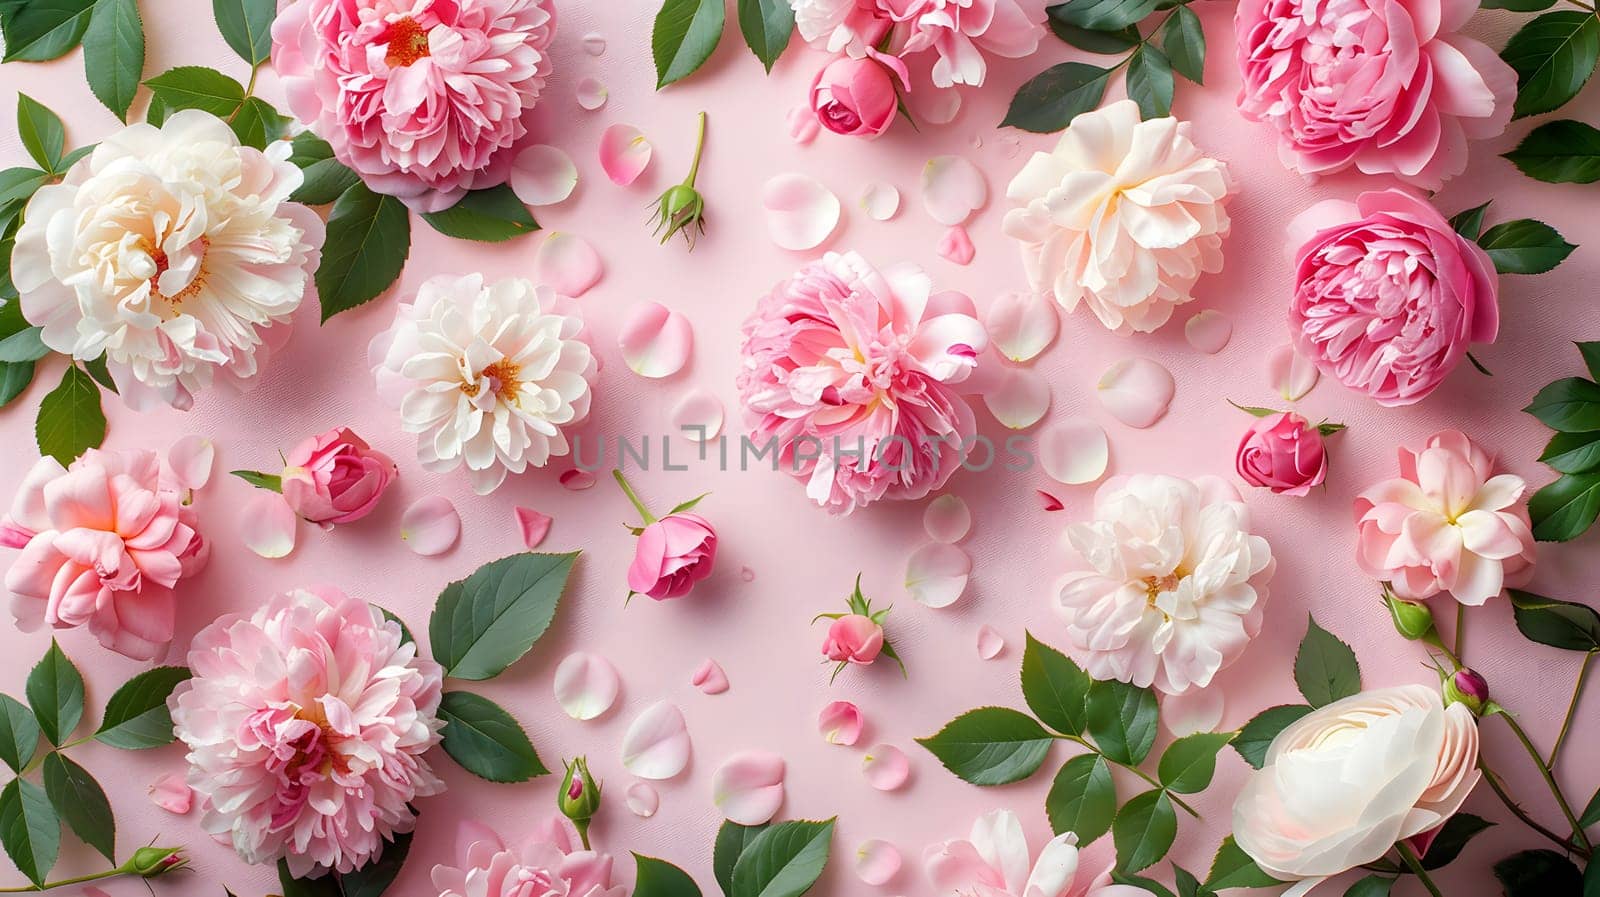 A variety of pink and white flowers with leaves scattered on a pink background, showcasing the beauty of flowering plants in the rose family